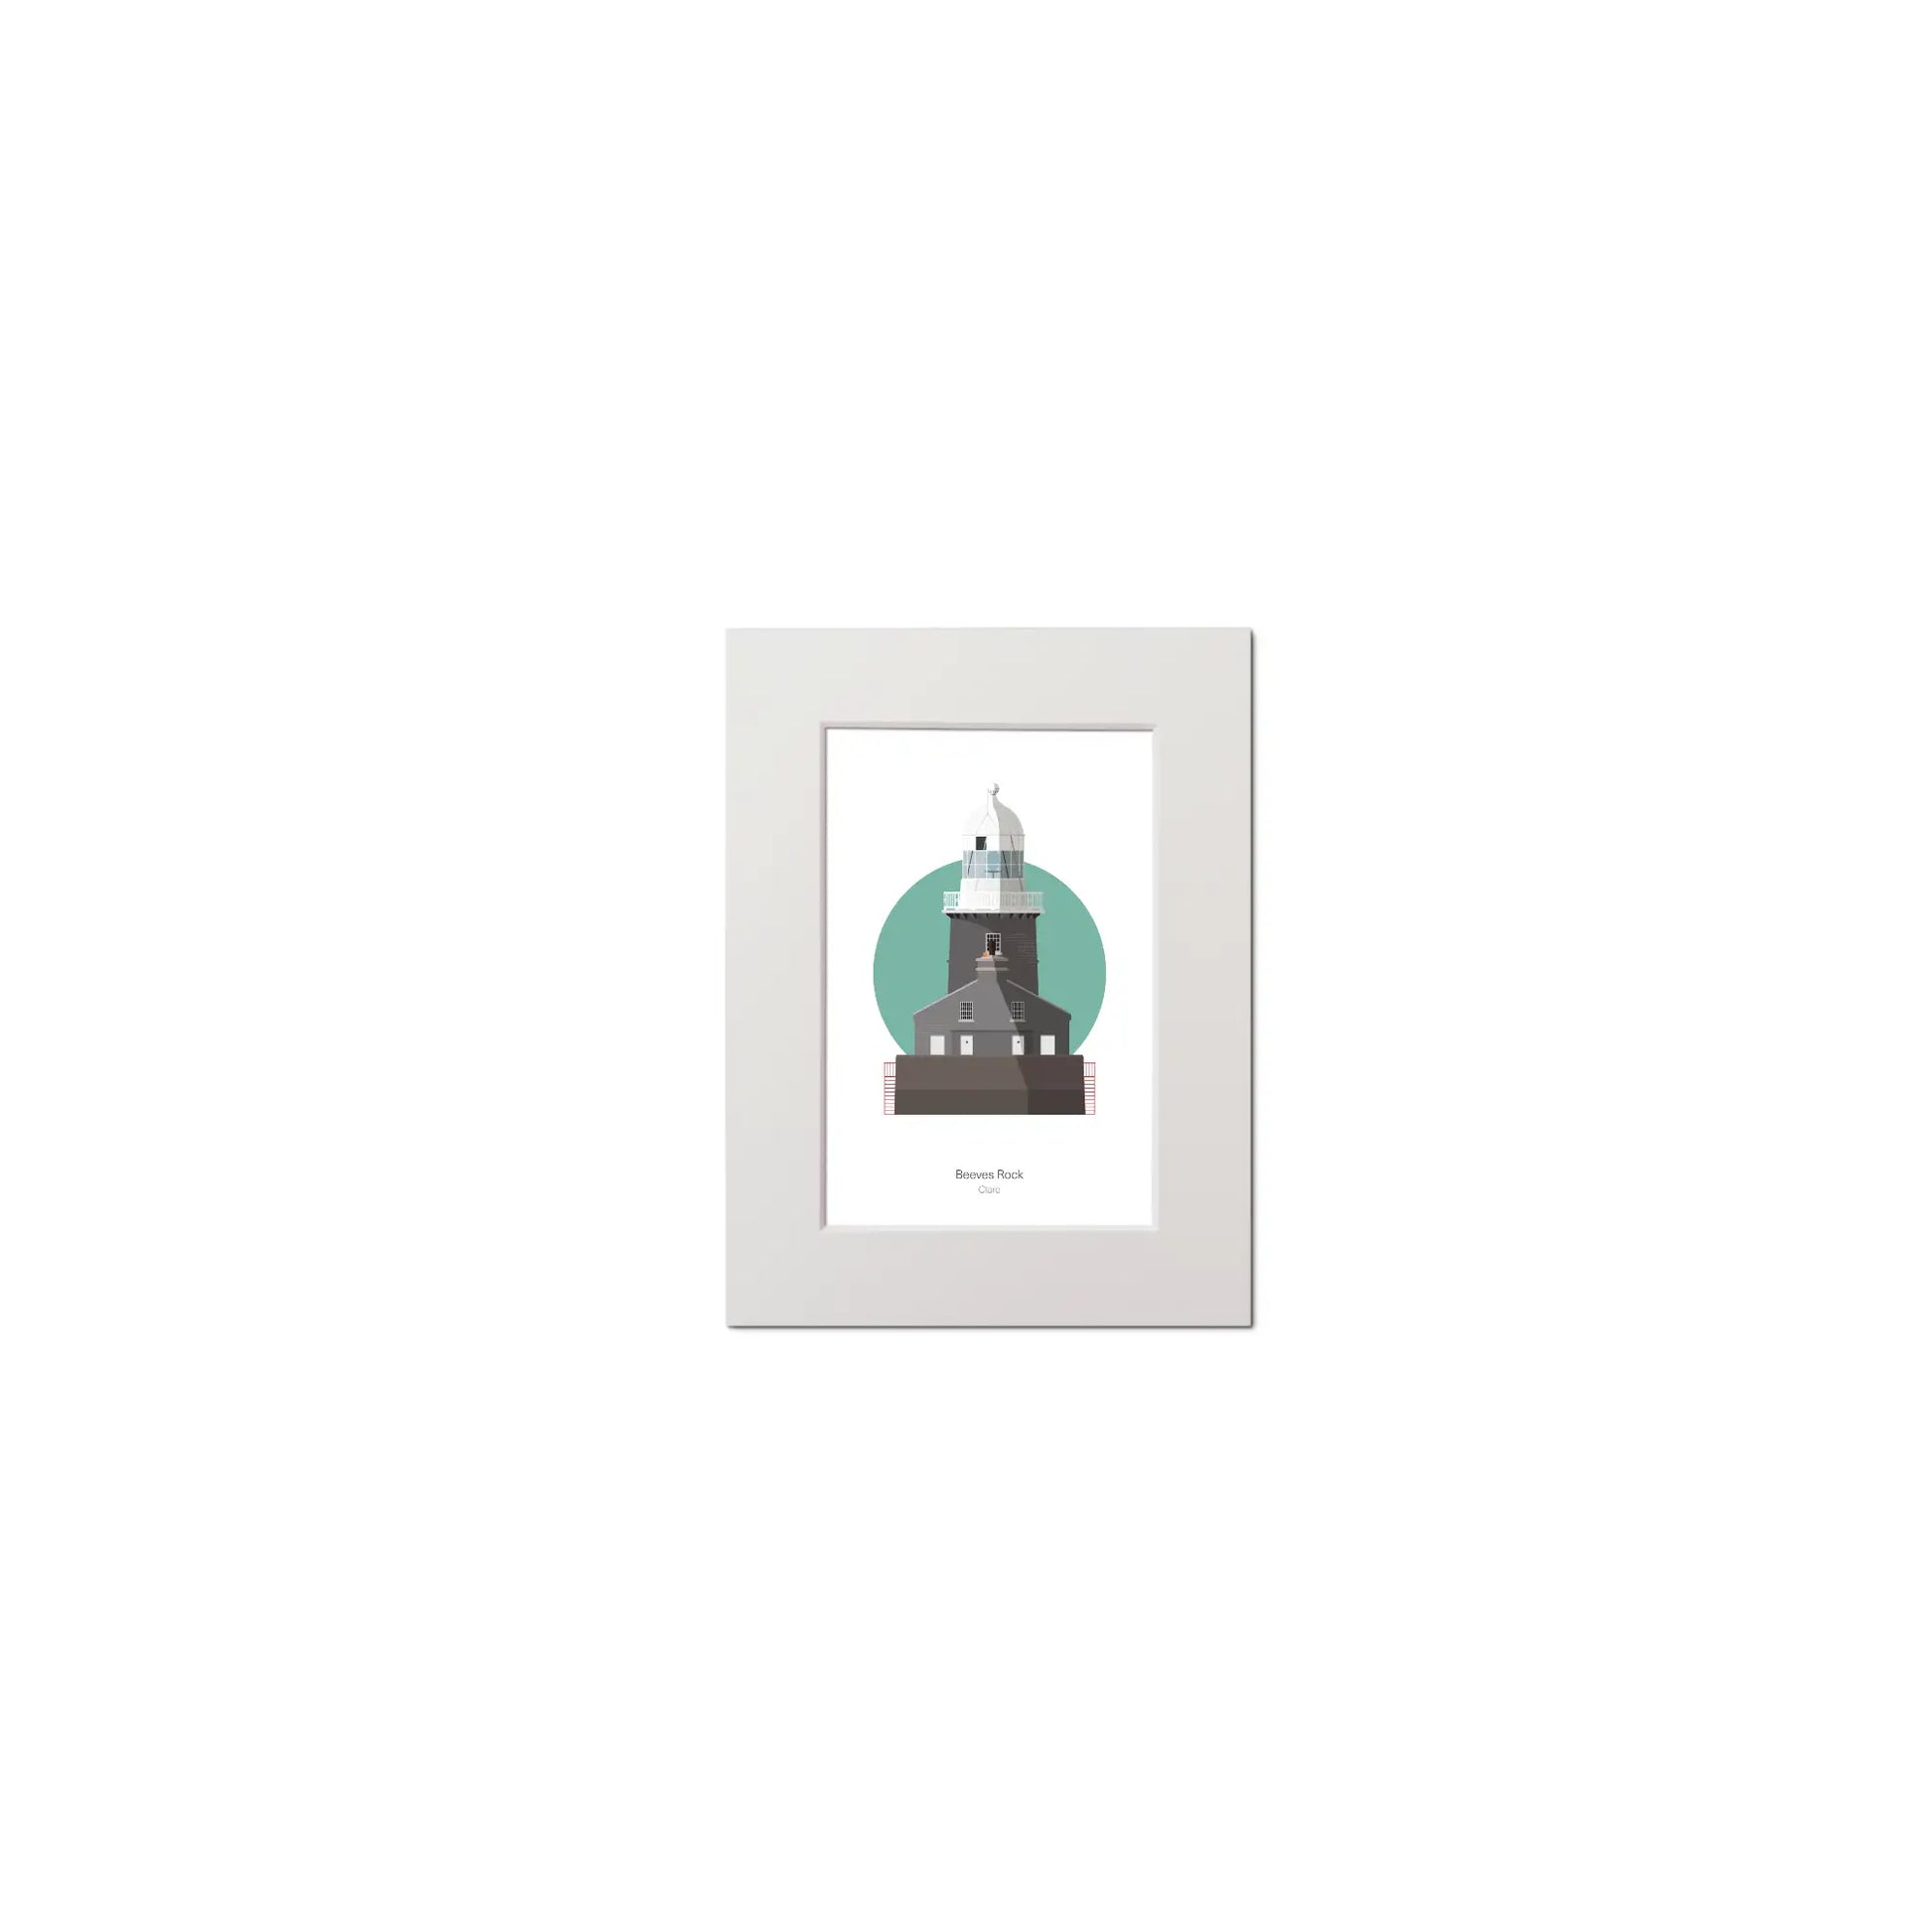 Wall hanging of Beeves Rock lighthouse on a white background inside light blue square, mounted and measuring 15x20cm.